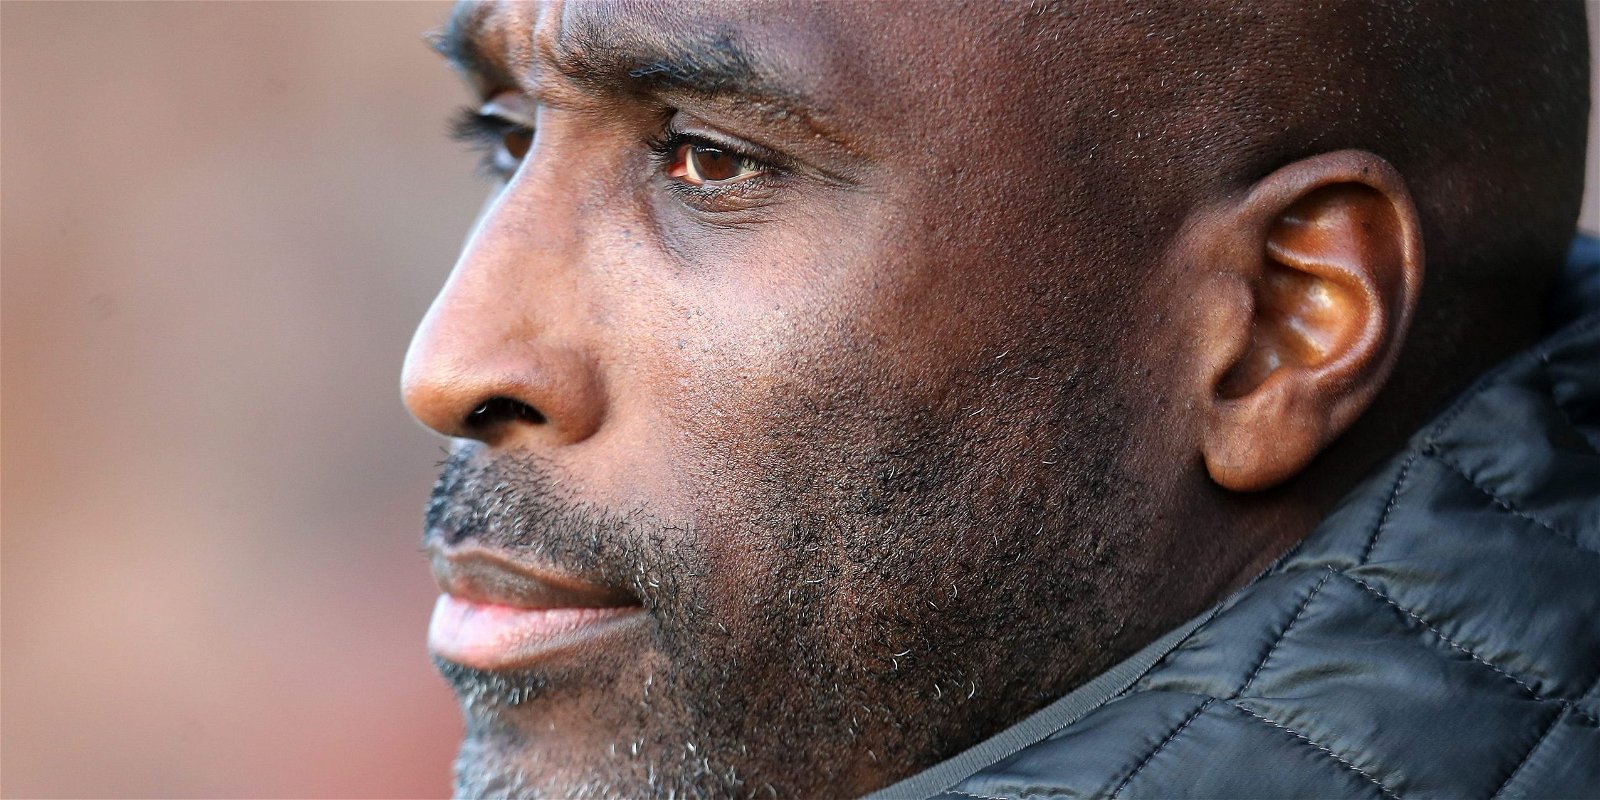 Portsmouth, Portsmouth legends quiz: 5 quickfire questions on Sol Campbell